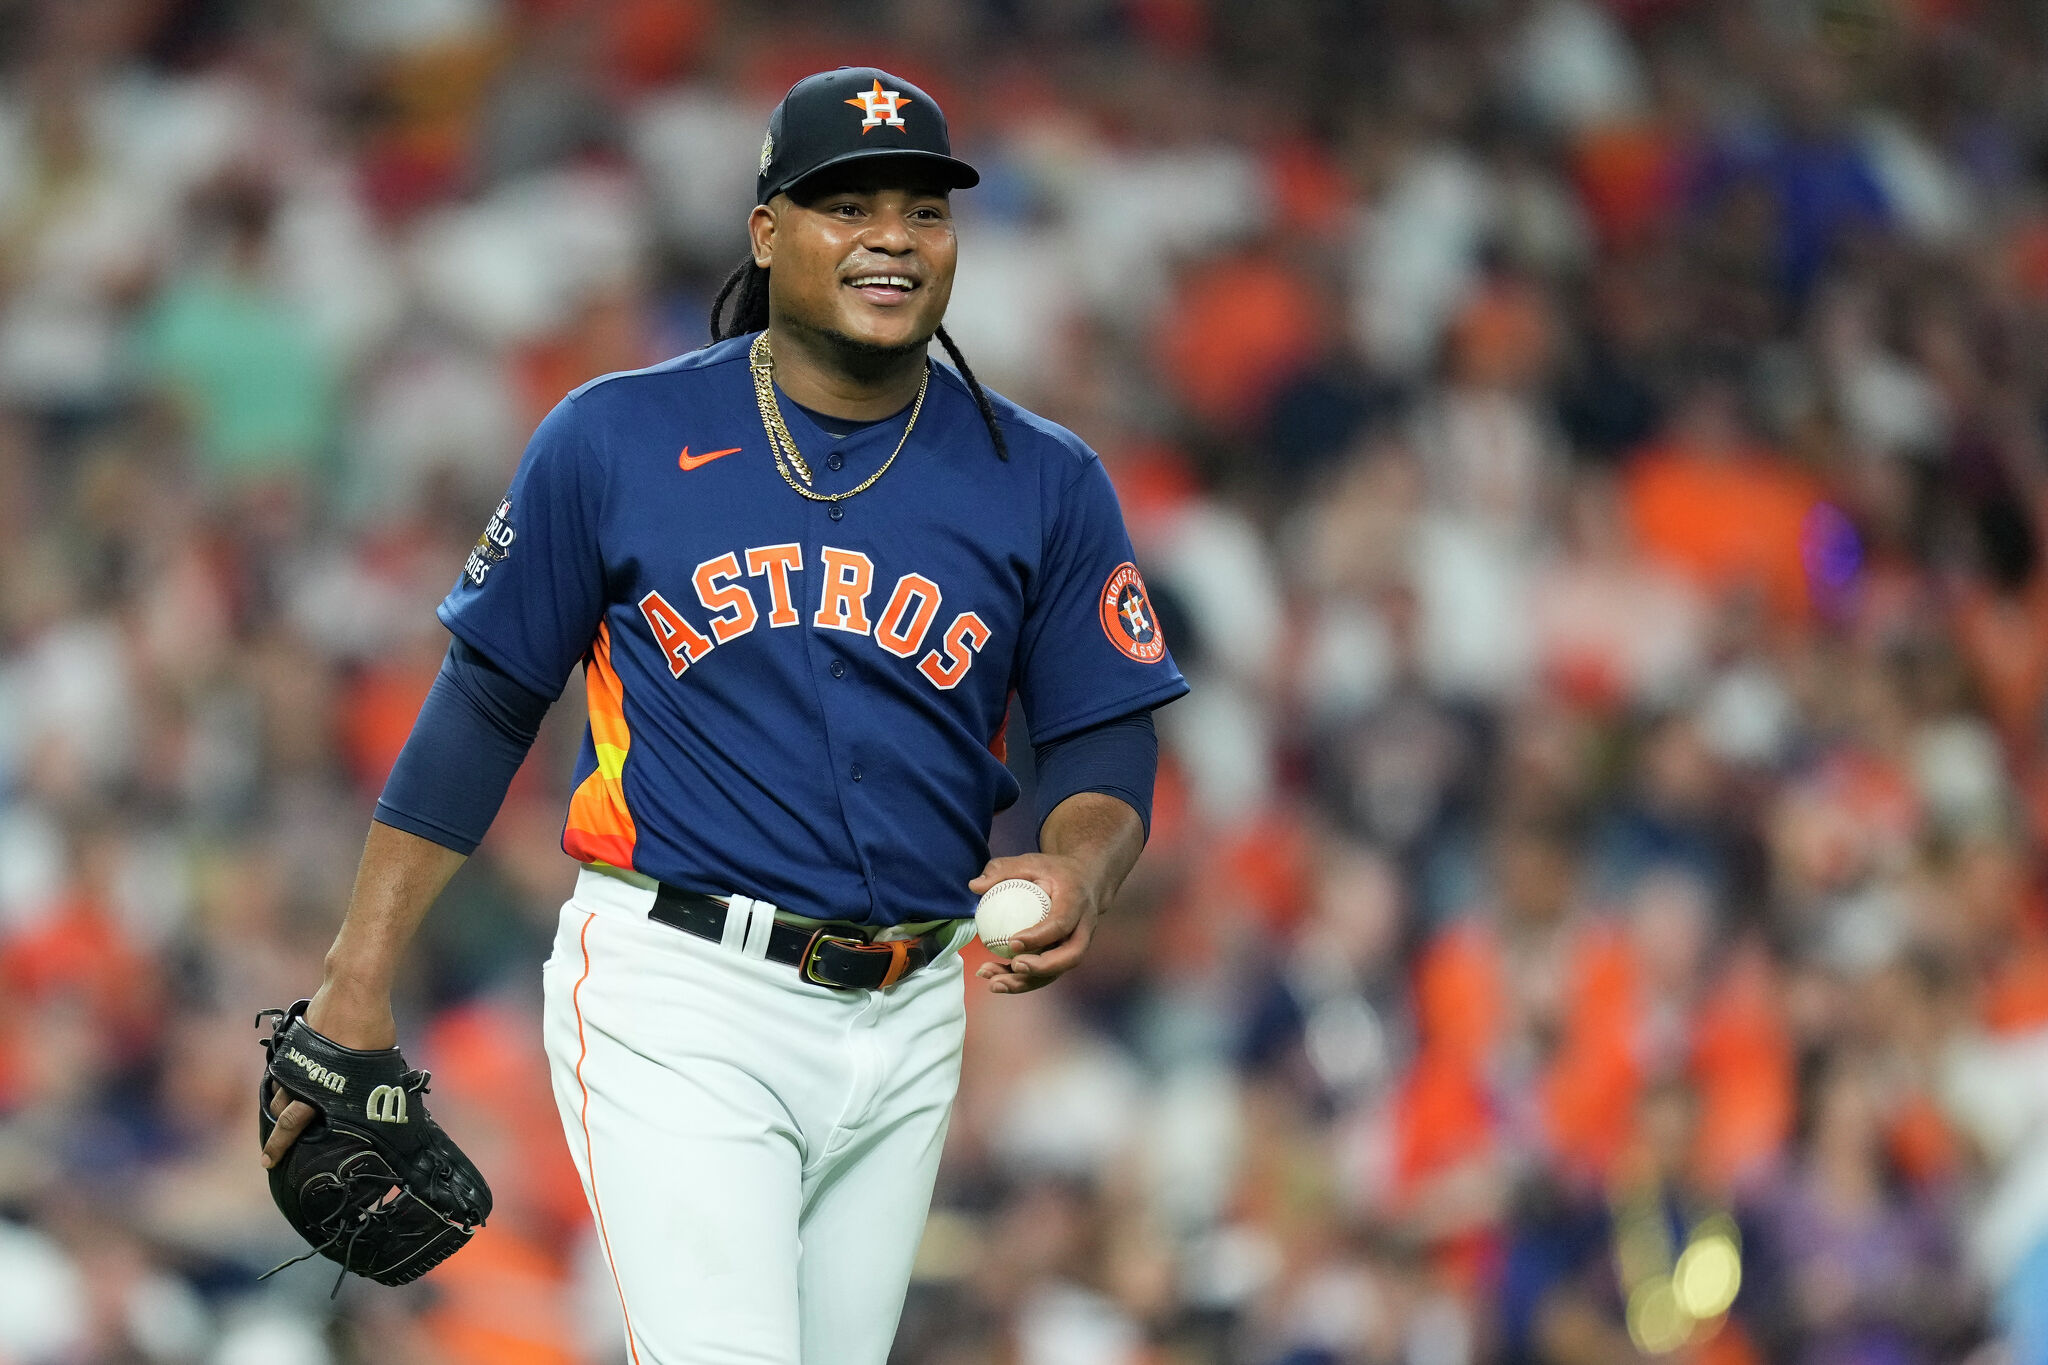 Houston Astros ace oddly omitted from top MLB pitchers list